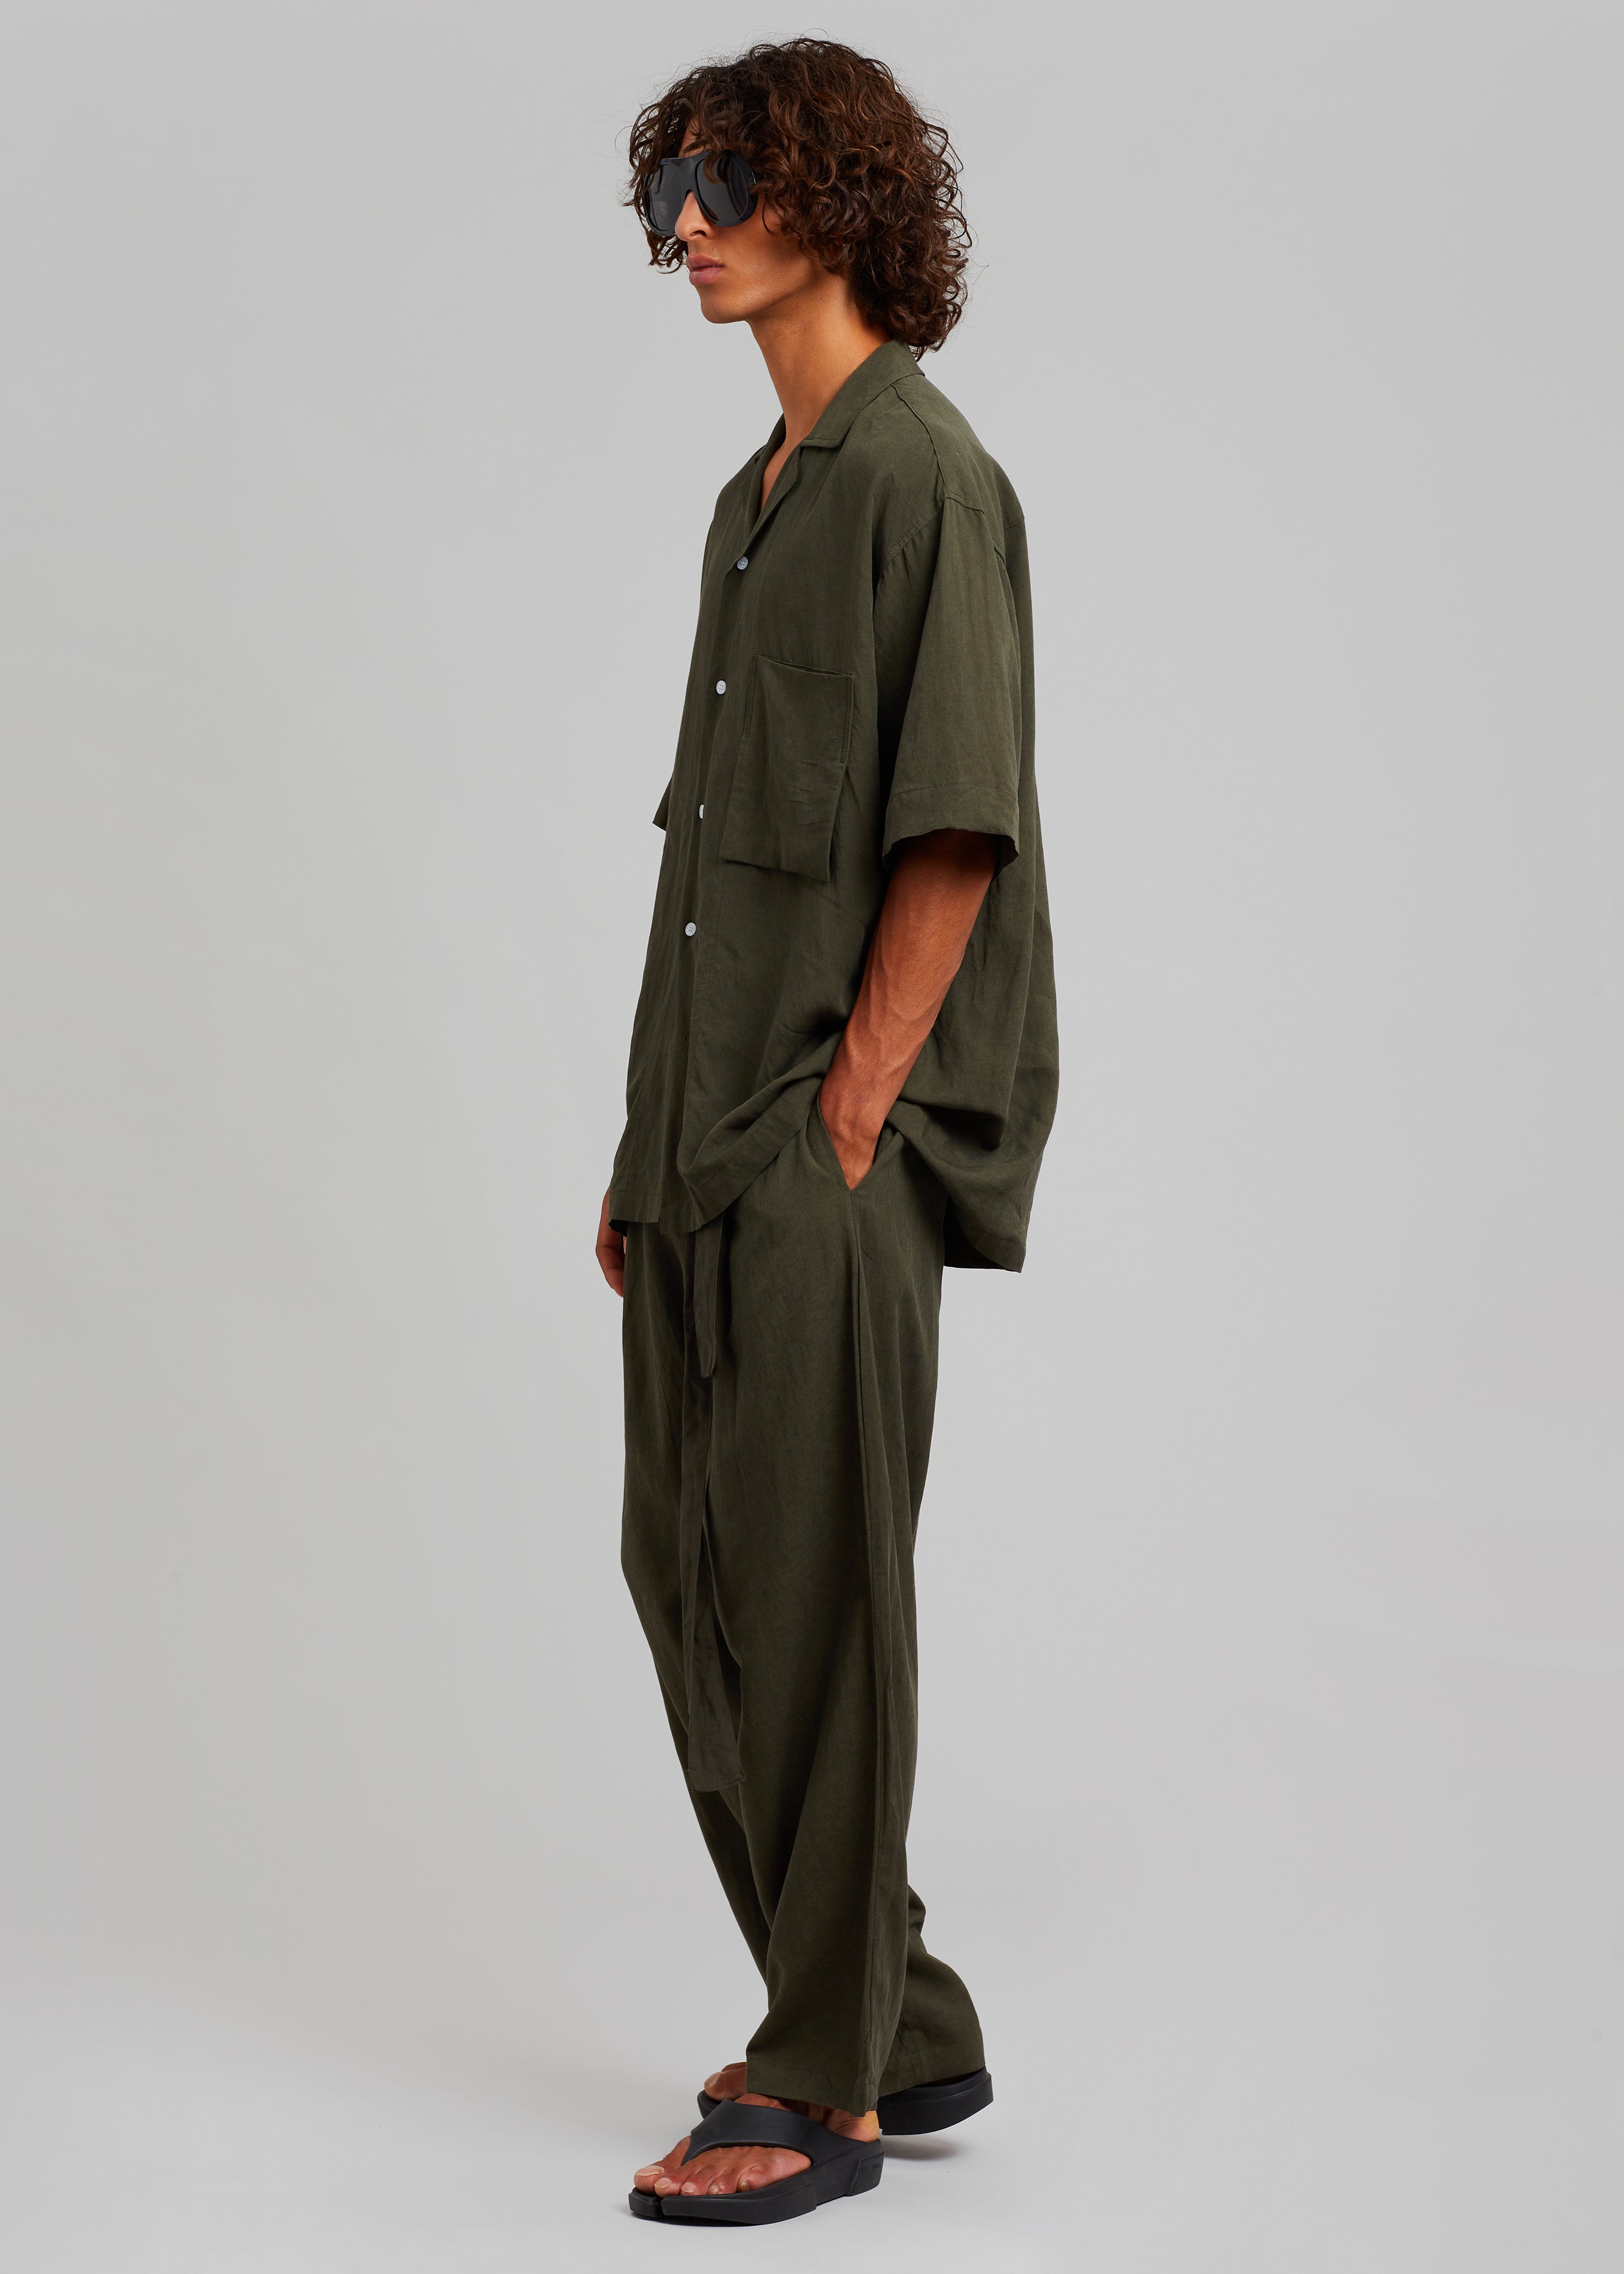 Georg Puch Pants - Olive - 2